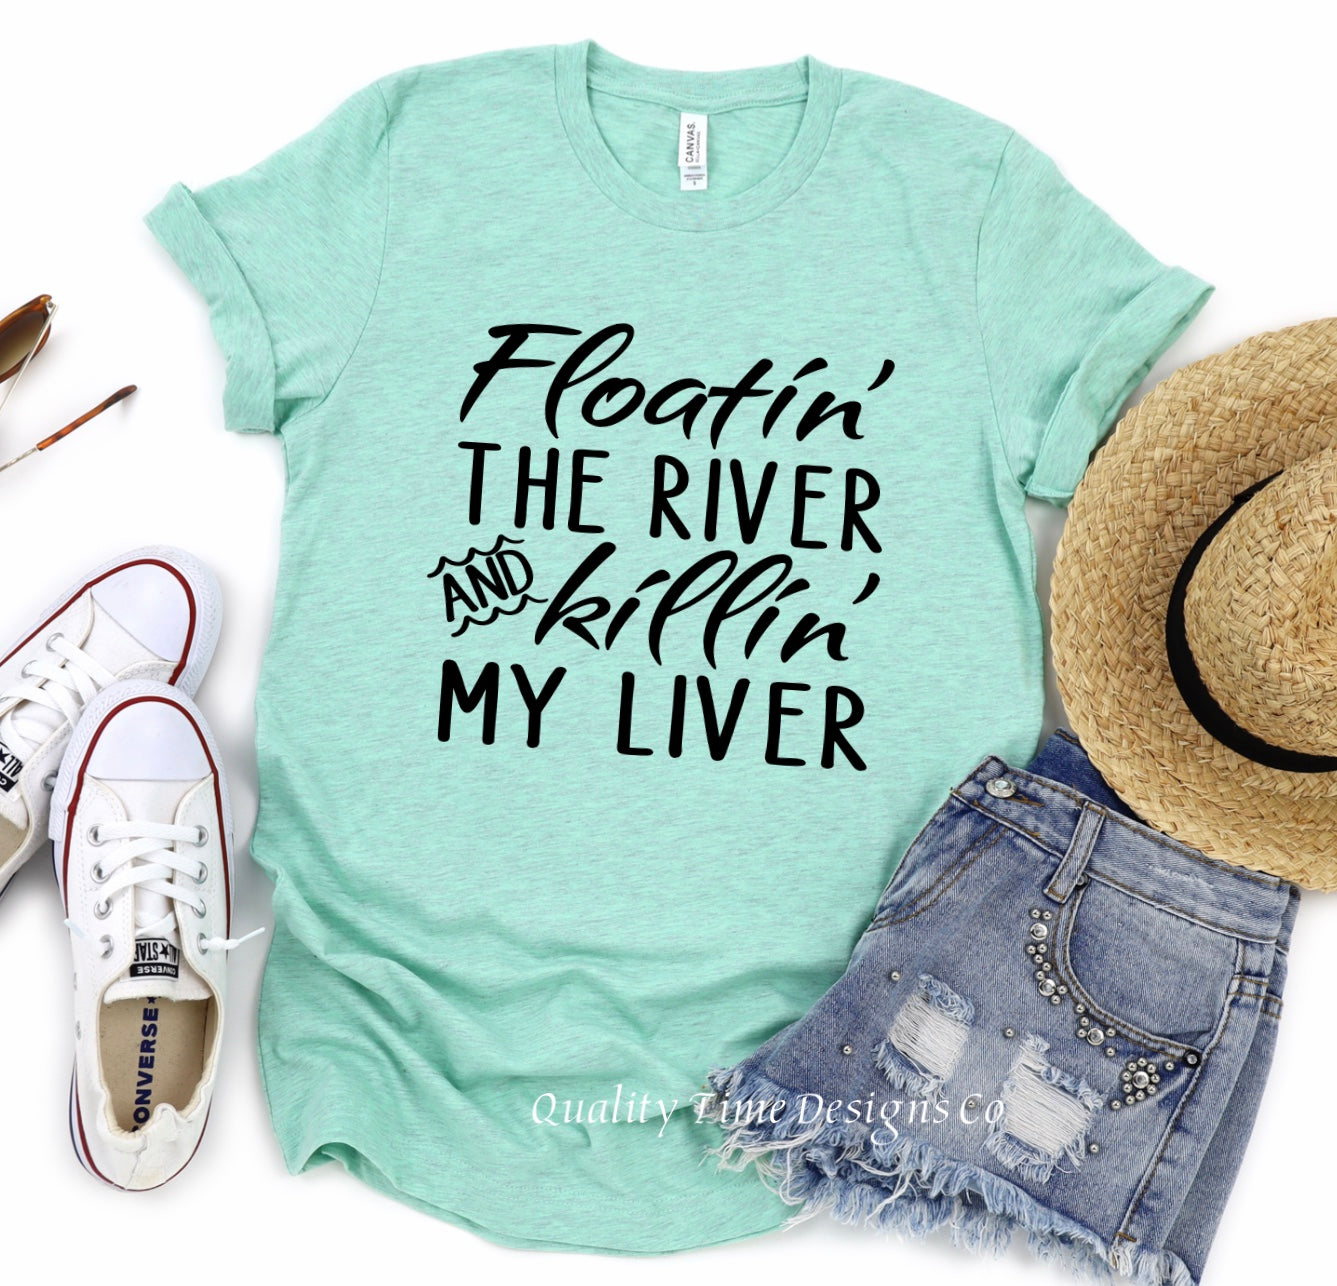 Floatin the River and killin my liver t-shirt 